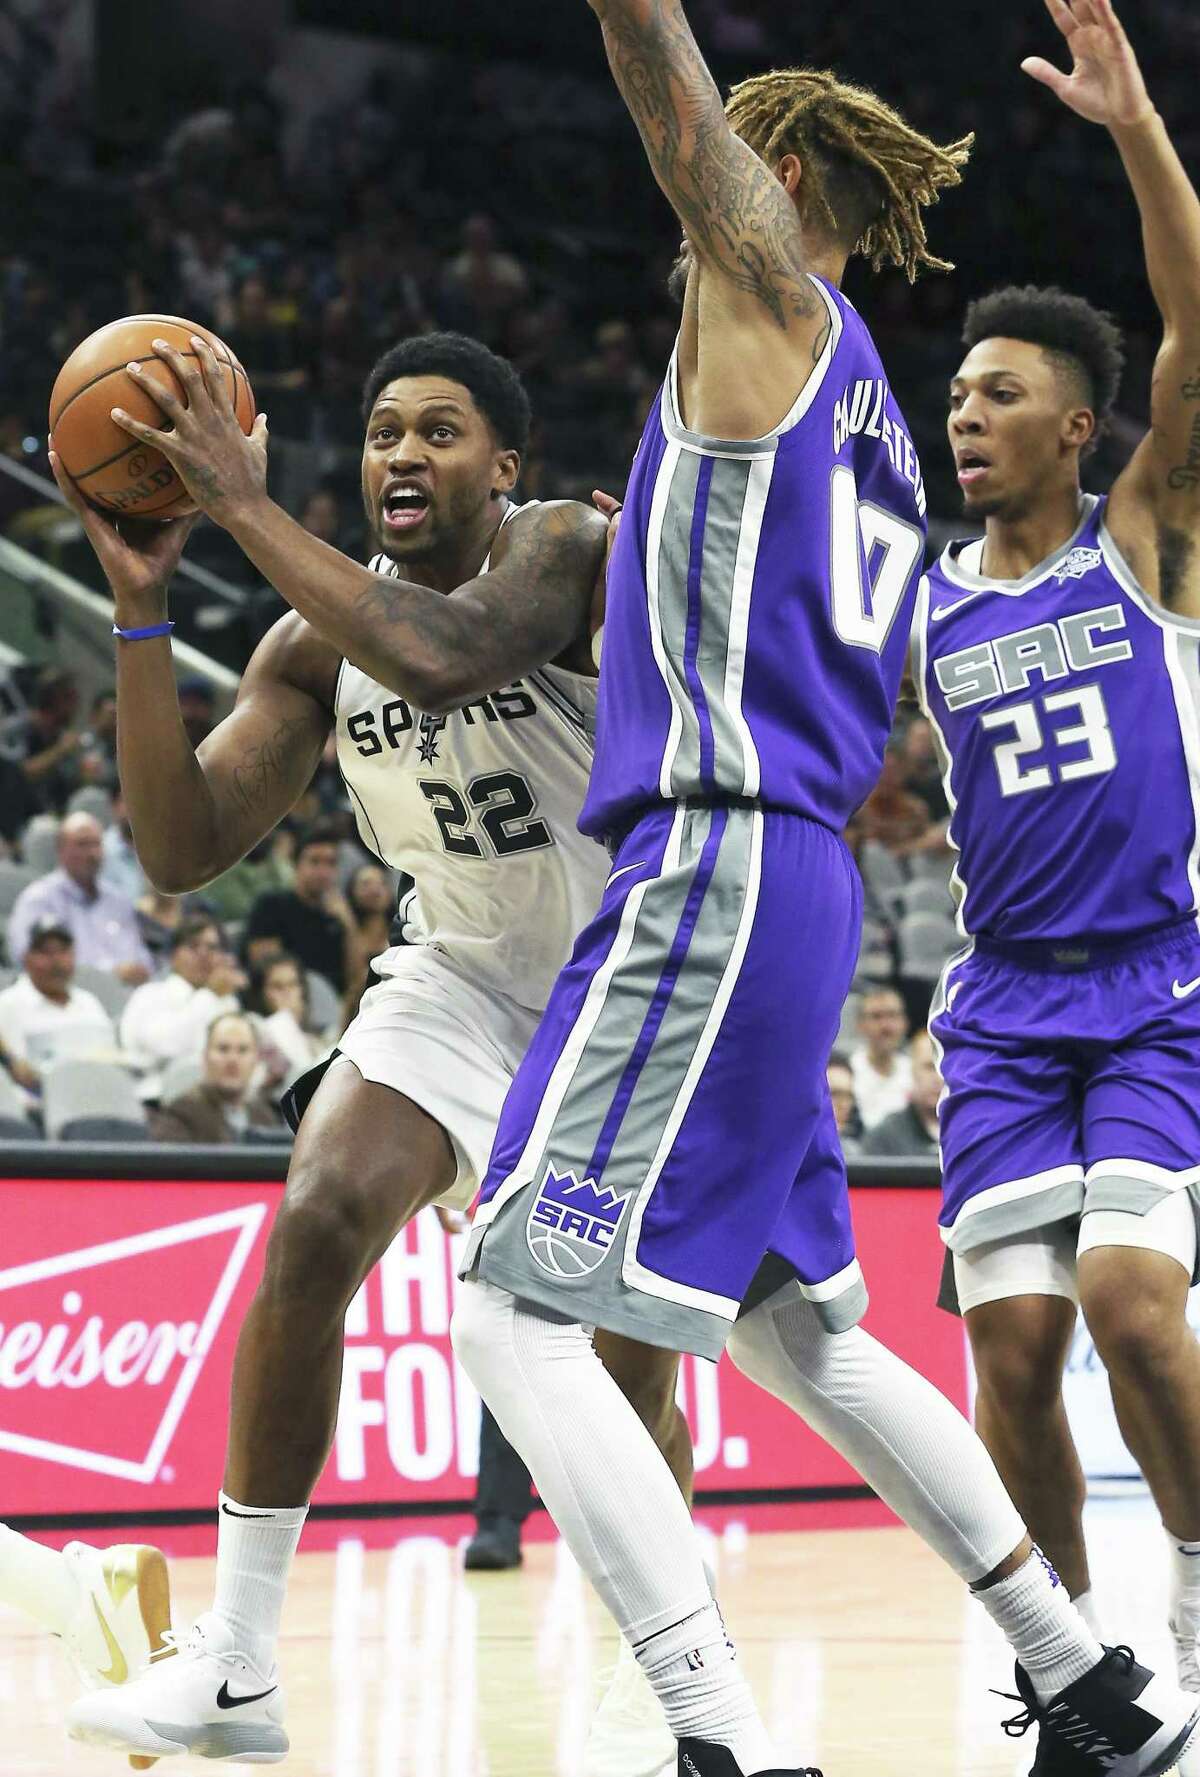 Rudy Gay tangles up the defense on the floor as the Spurs play the Kings at the AT&T Center on October 6, 2017.